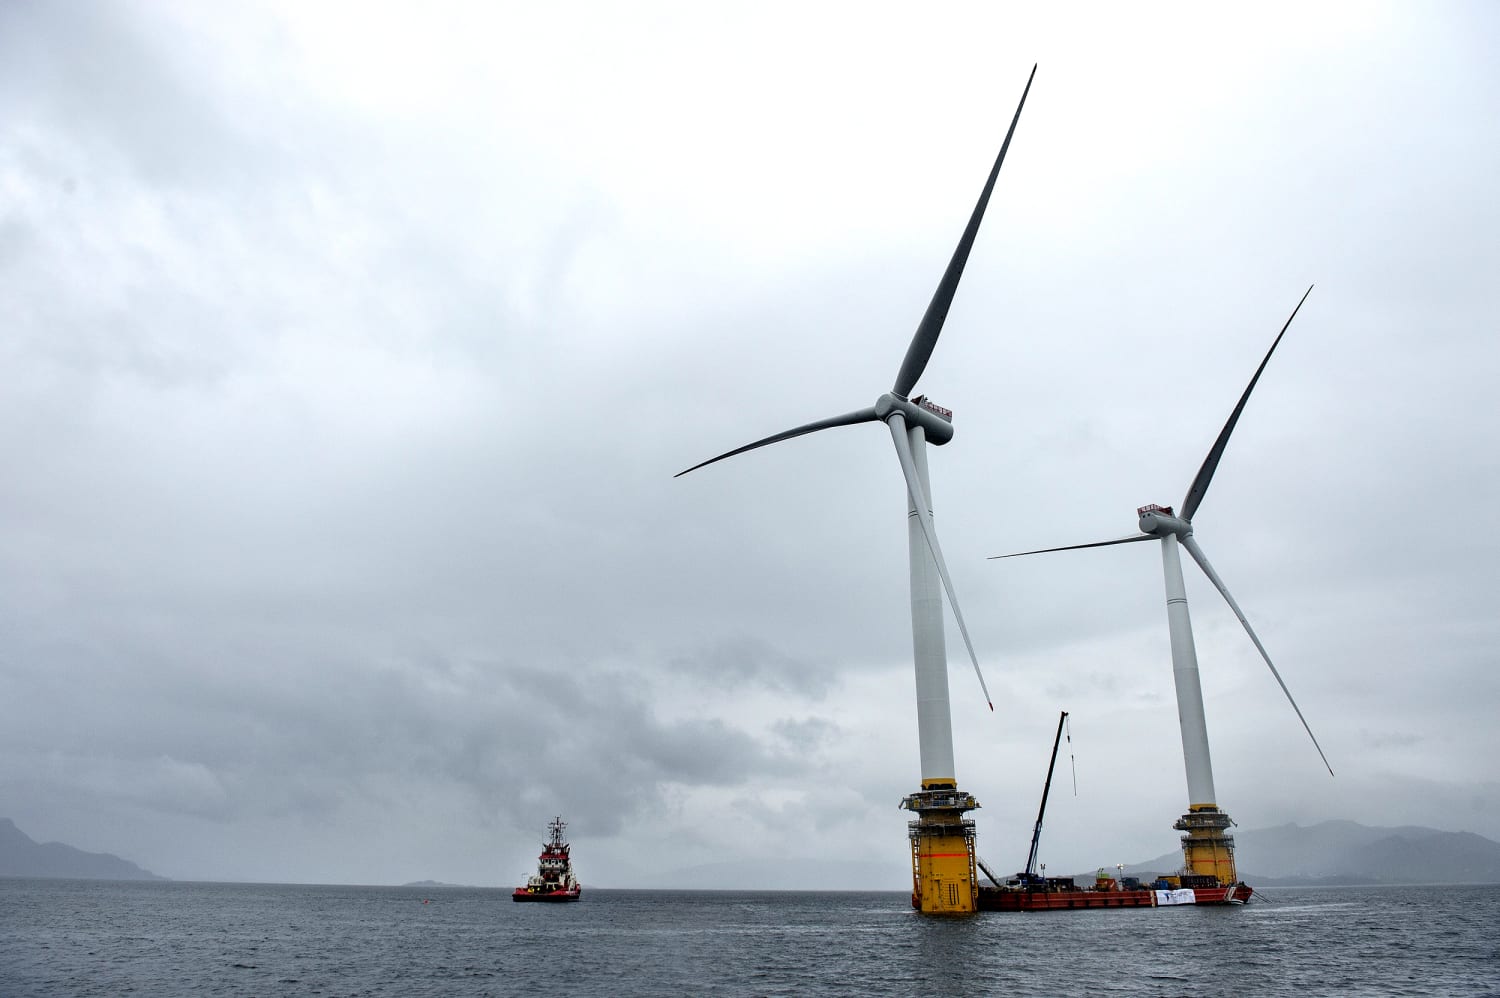 Turbines assembled in CT are part of first large offshore wind